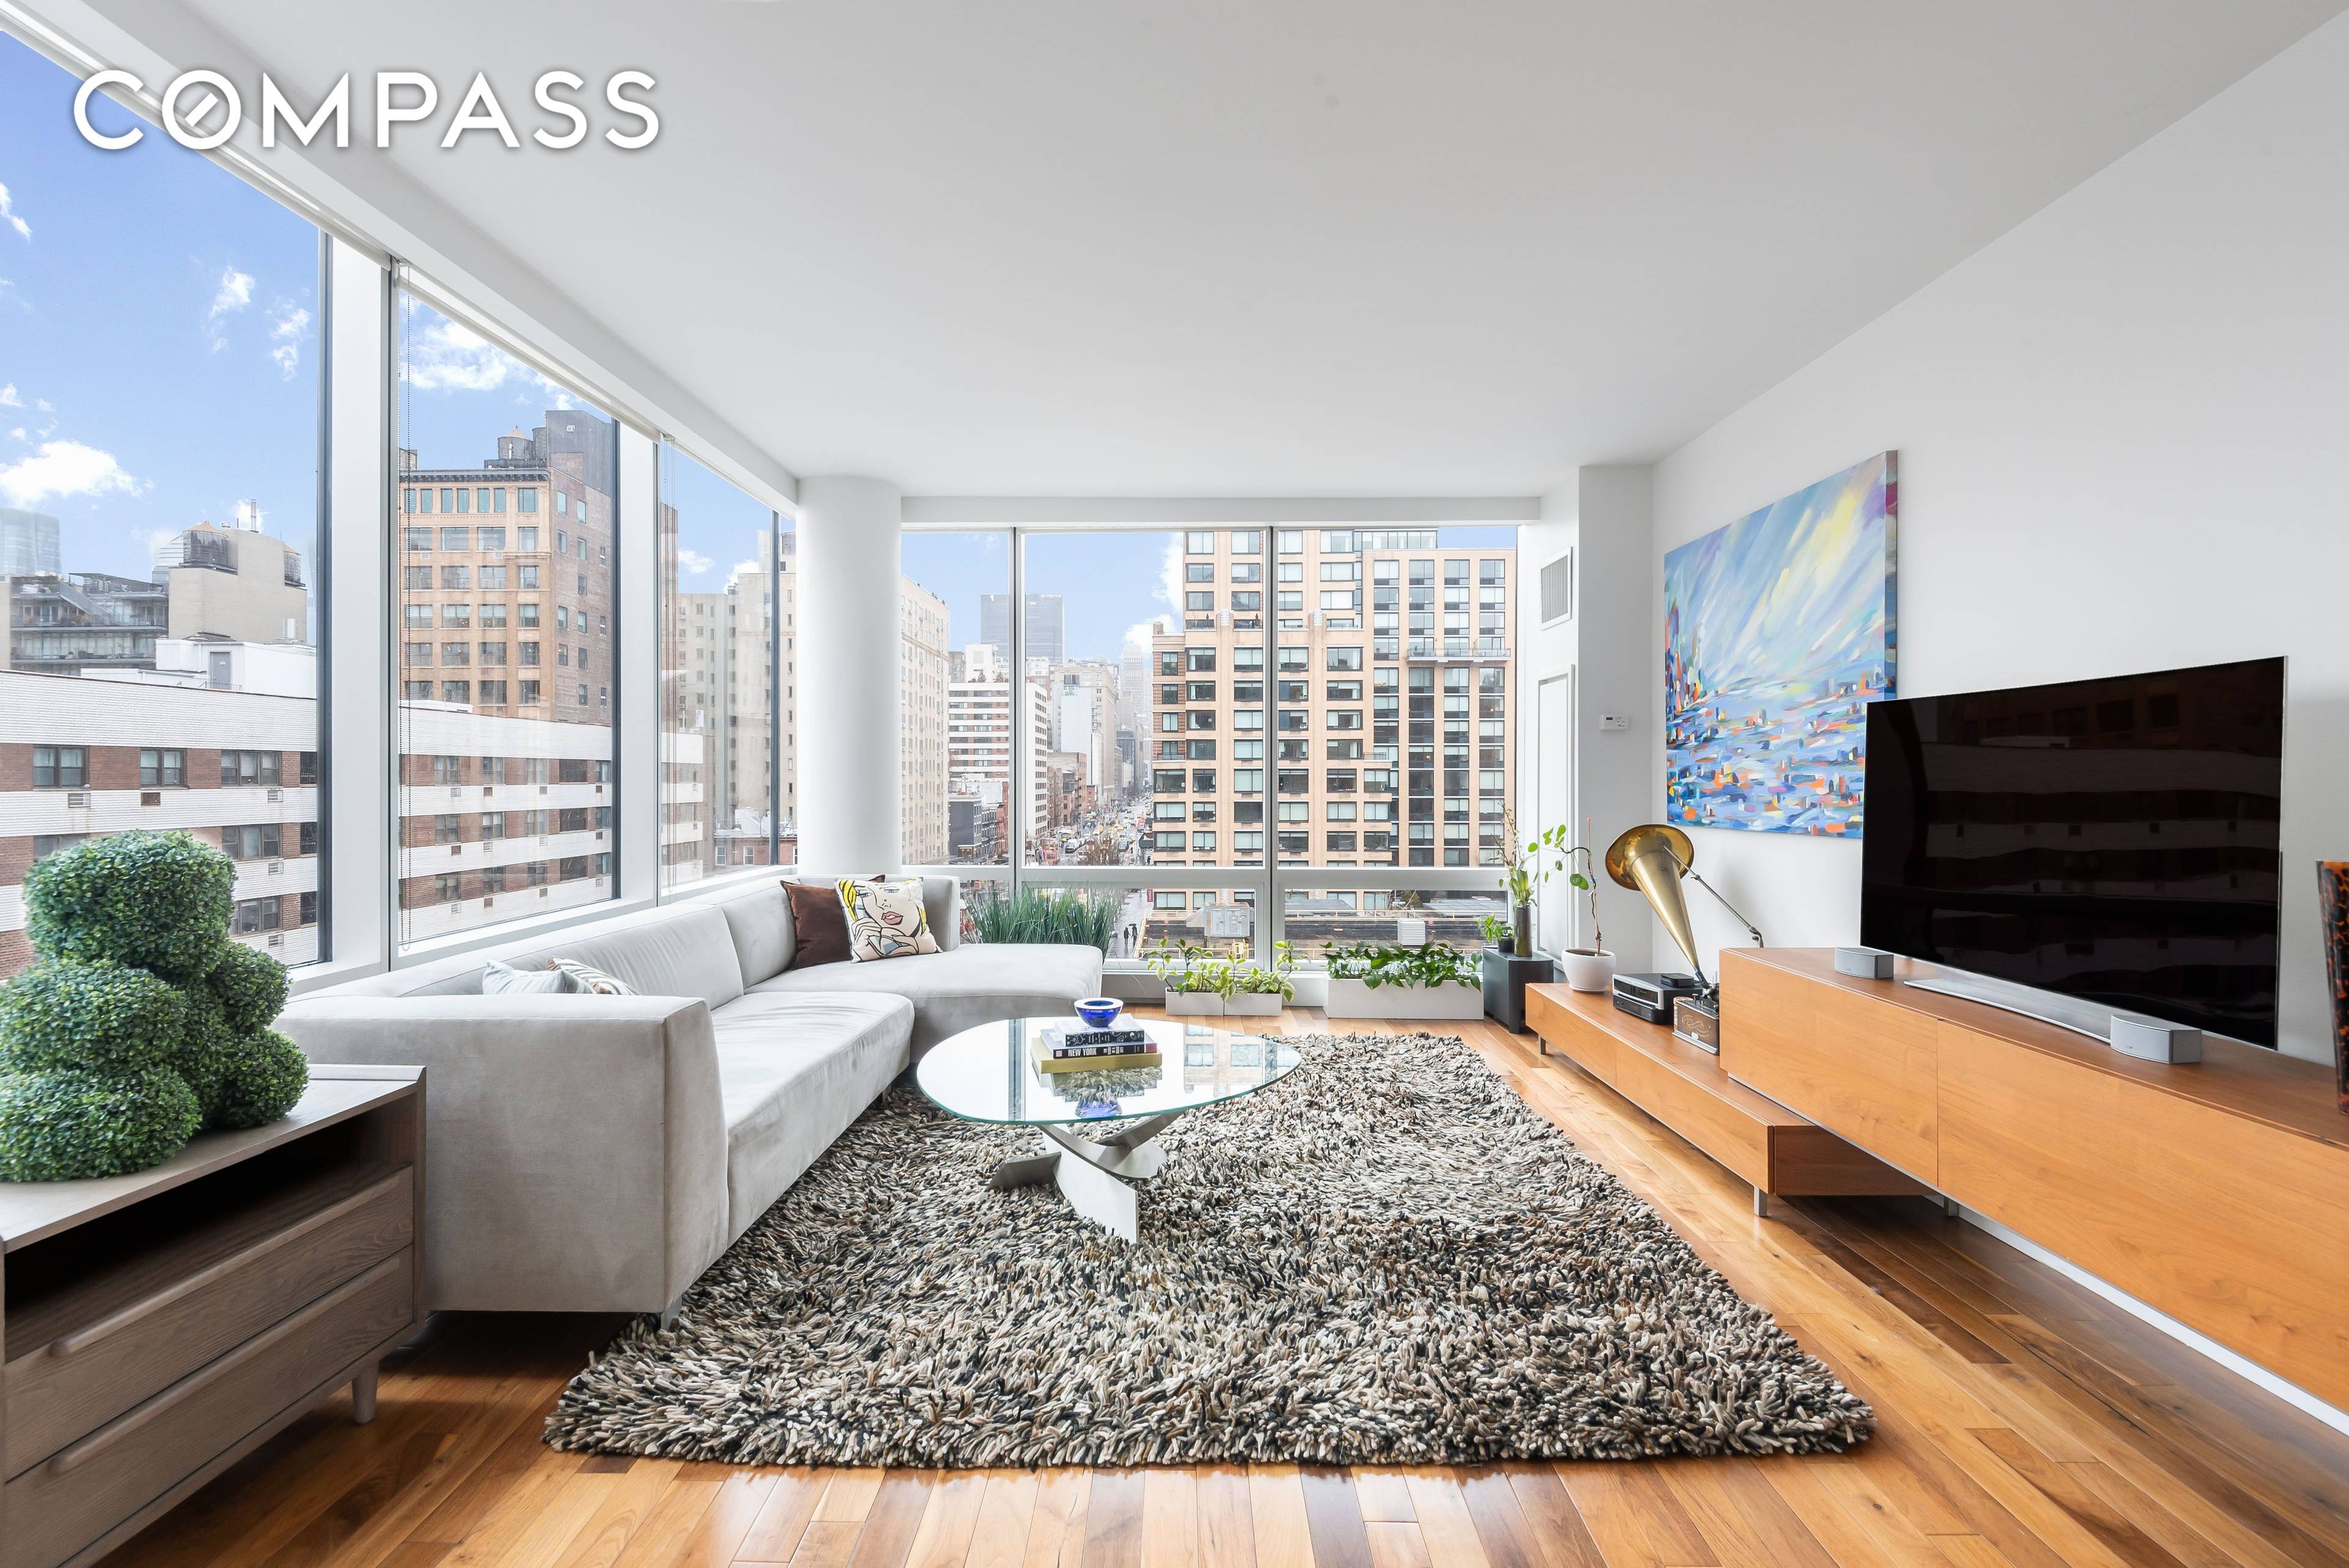 The very best of boutique condo living at the iconic Yves Condominium, in the heart of Chelsea.